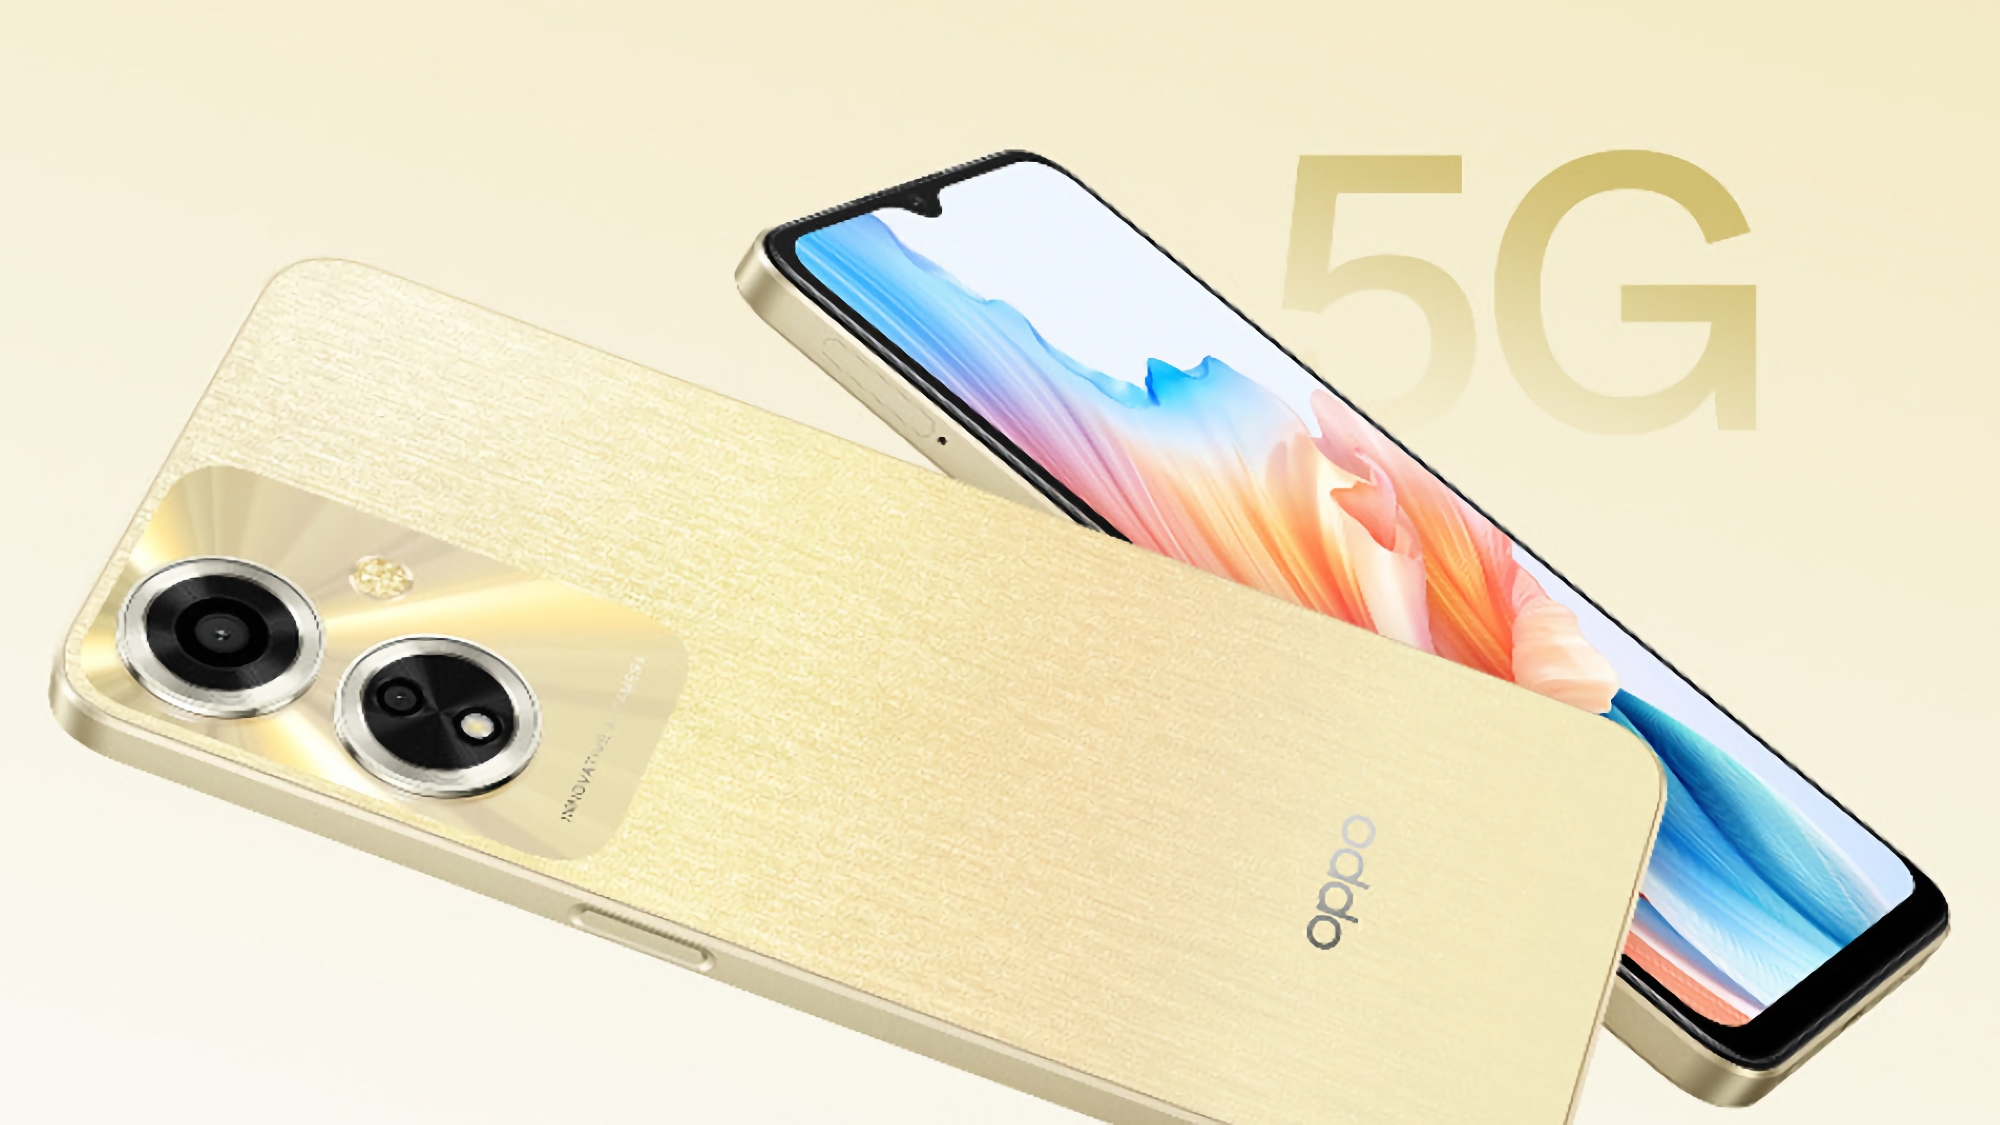 90Hz display, Dimensity 6020 chip and 5000mAh battery: insider reveals OPPO A59 5G specs and price